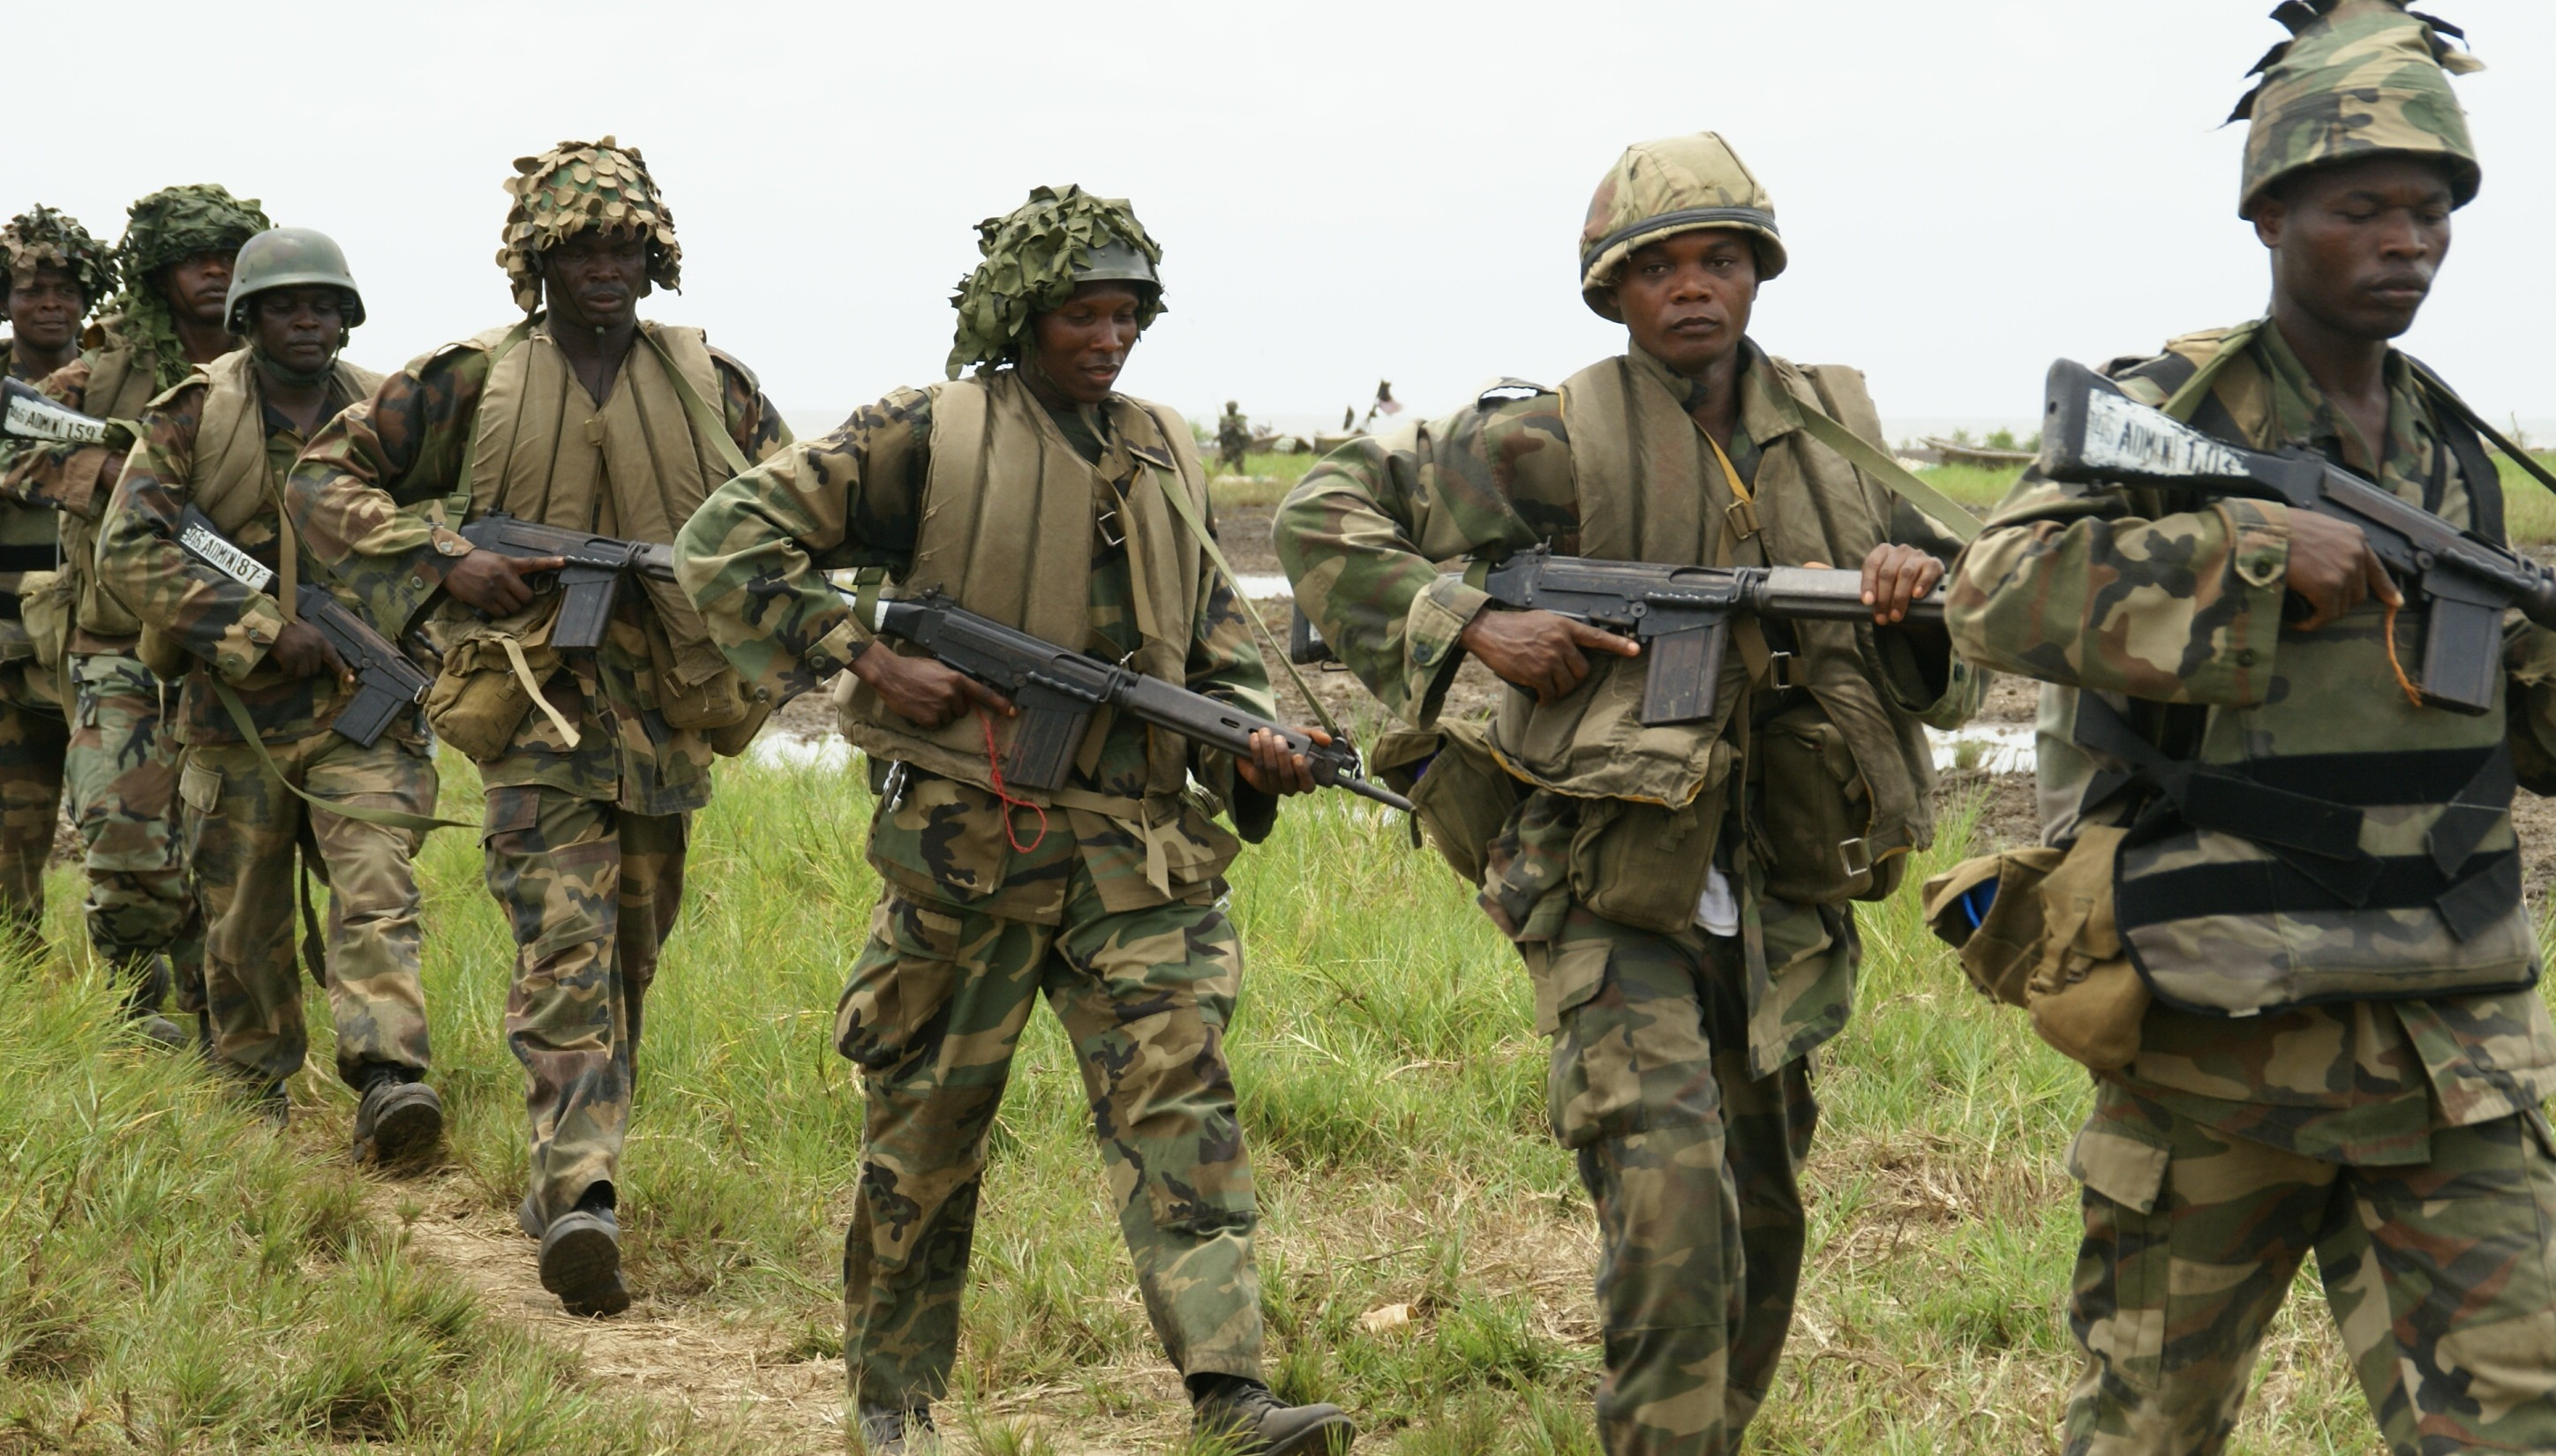 Boko Haram sect  launched a dawn attack on soldiers and retook Kareto town